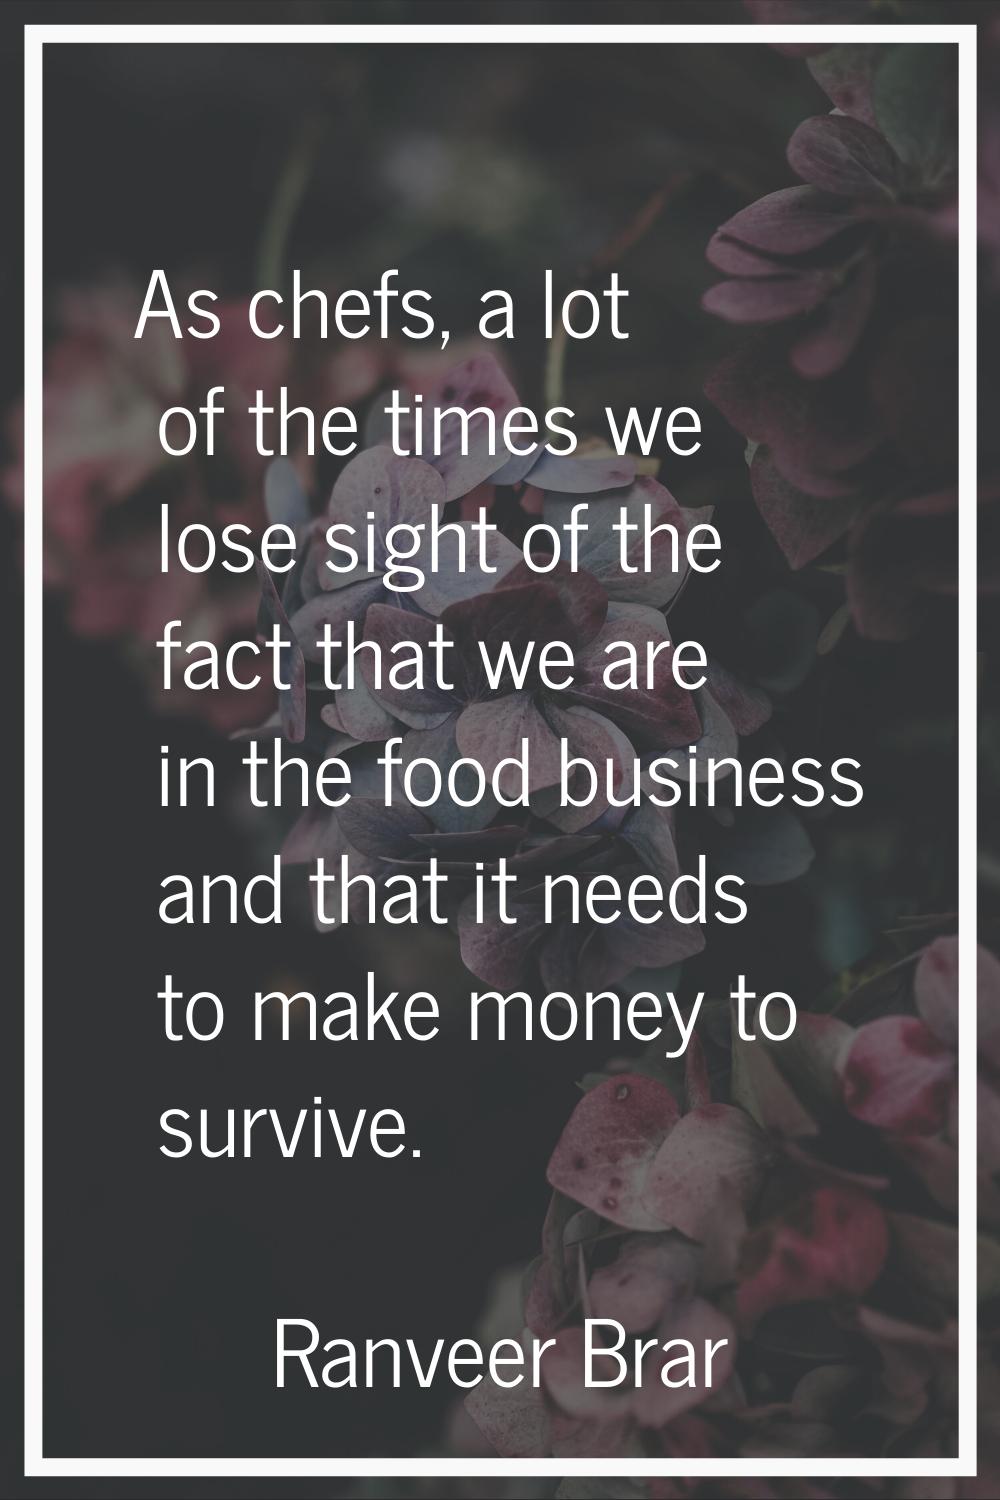 As chefs, a lot of the times we lose sight of the fact that we are in the food business and that it